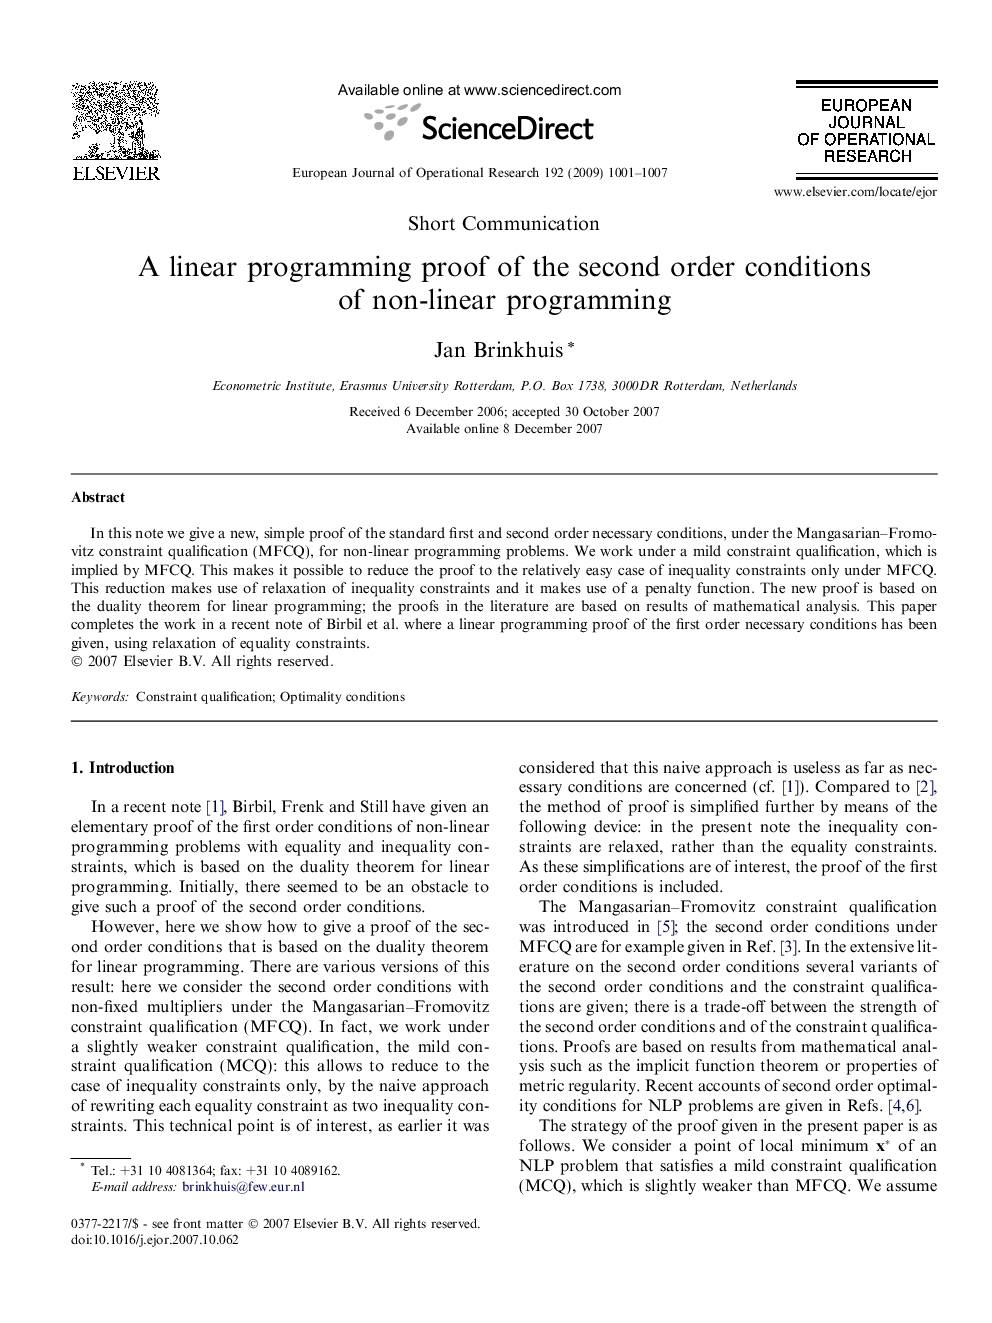 A linear programming proof of the second order conditions of non-linear programming